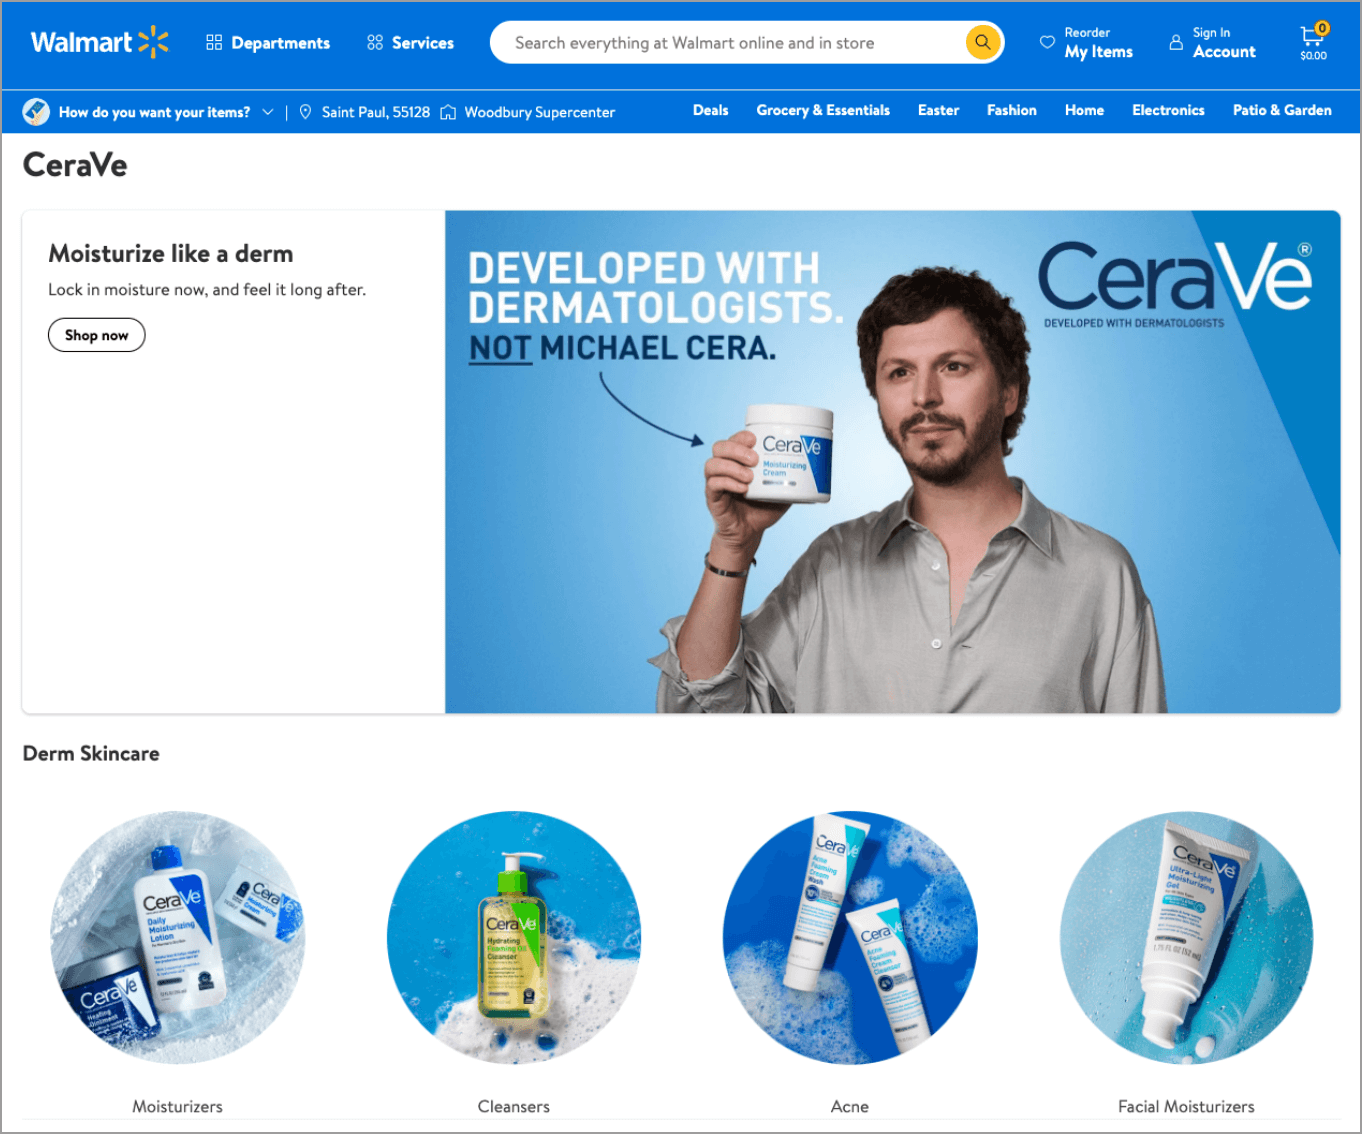 CeraVe ad on Walmart.com featuring Michael Cera on CeraVe brand page to sell products